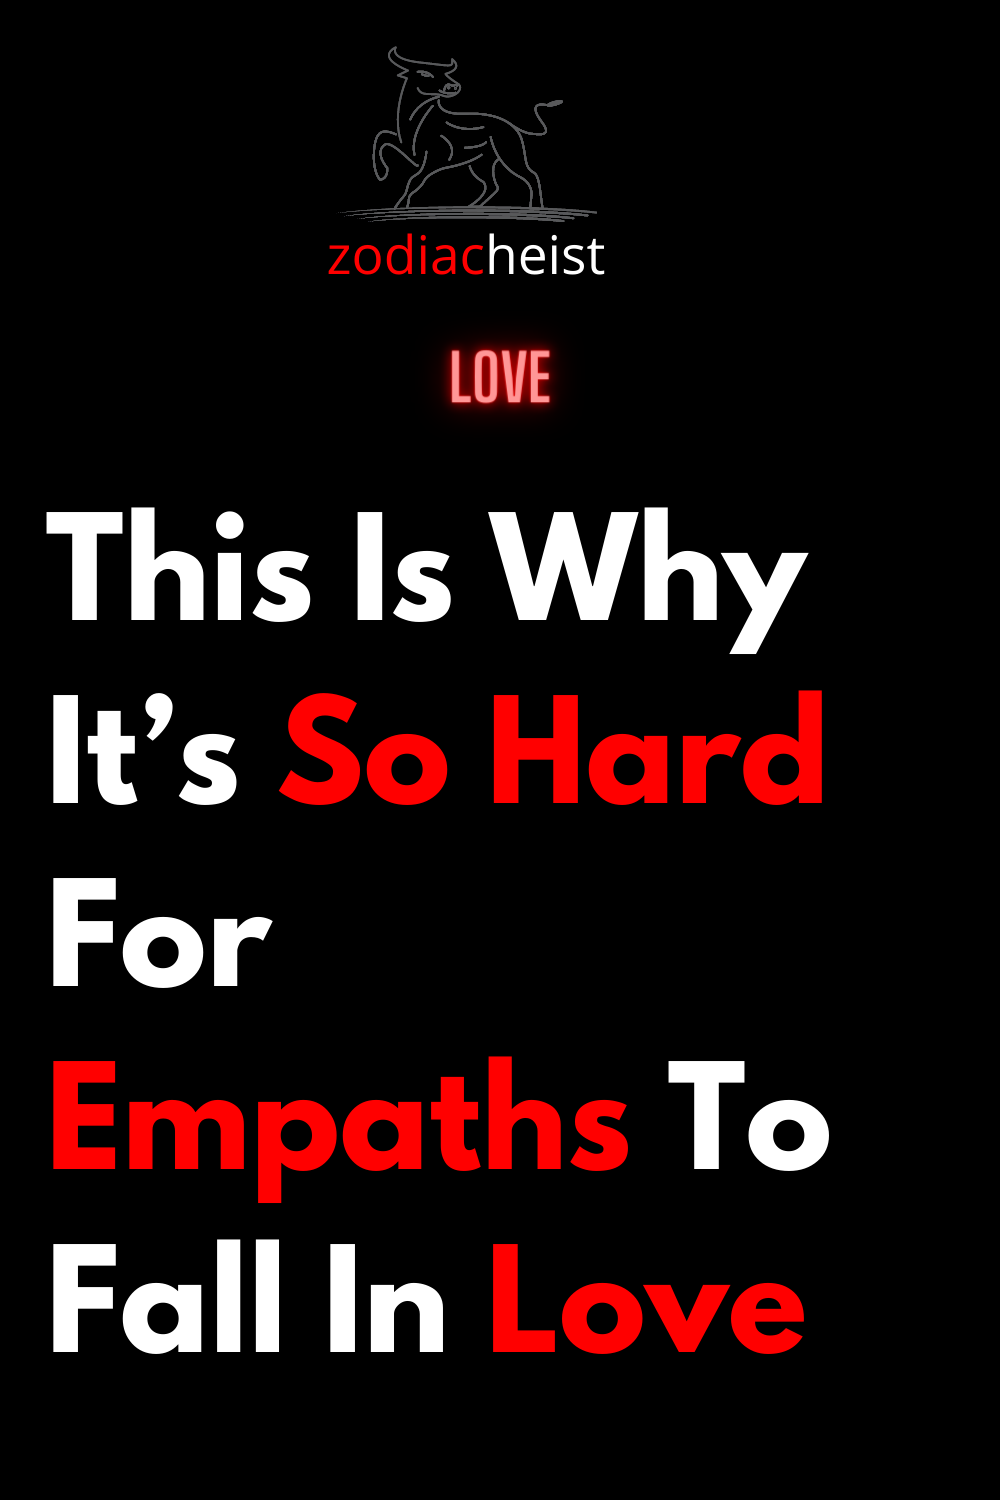 This Is Why It’s So Hard For Empaths To Fall In Love